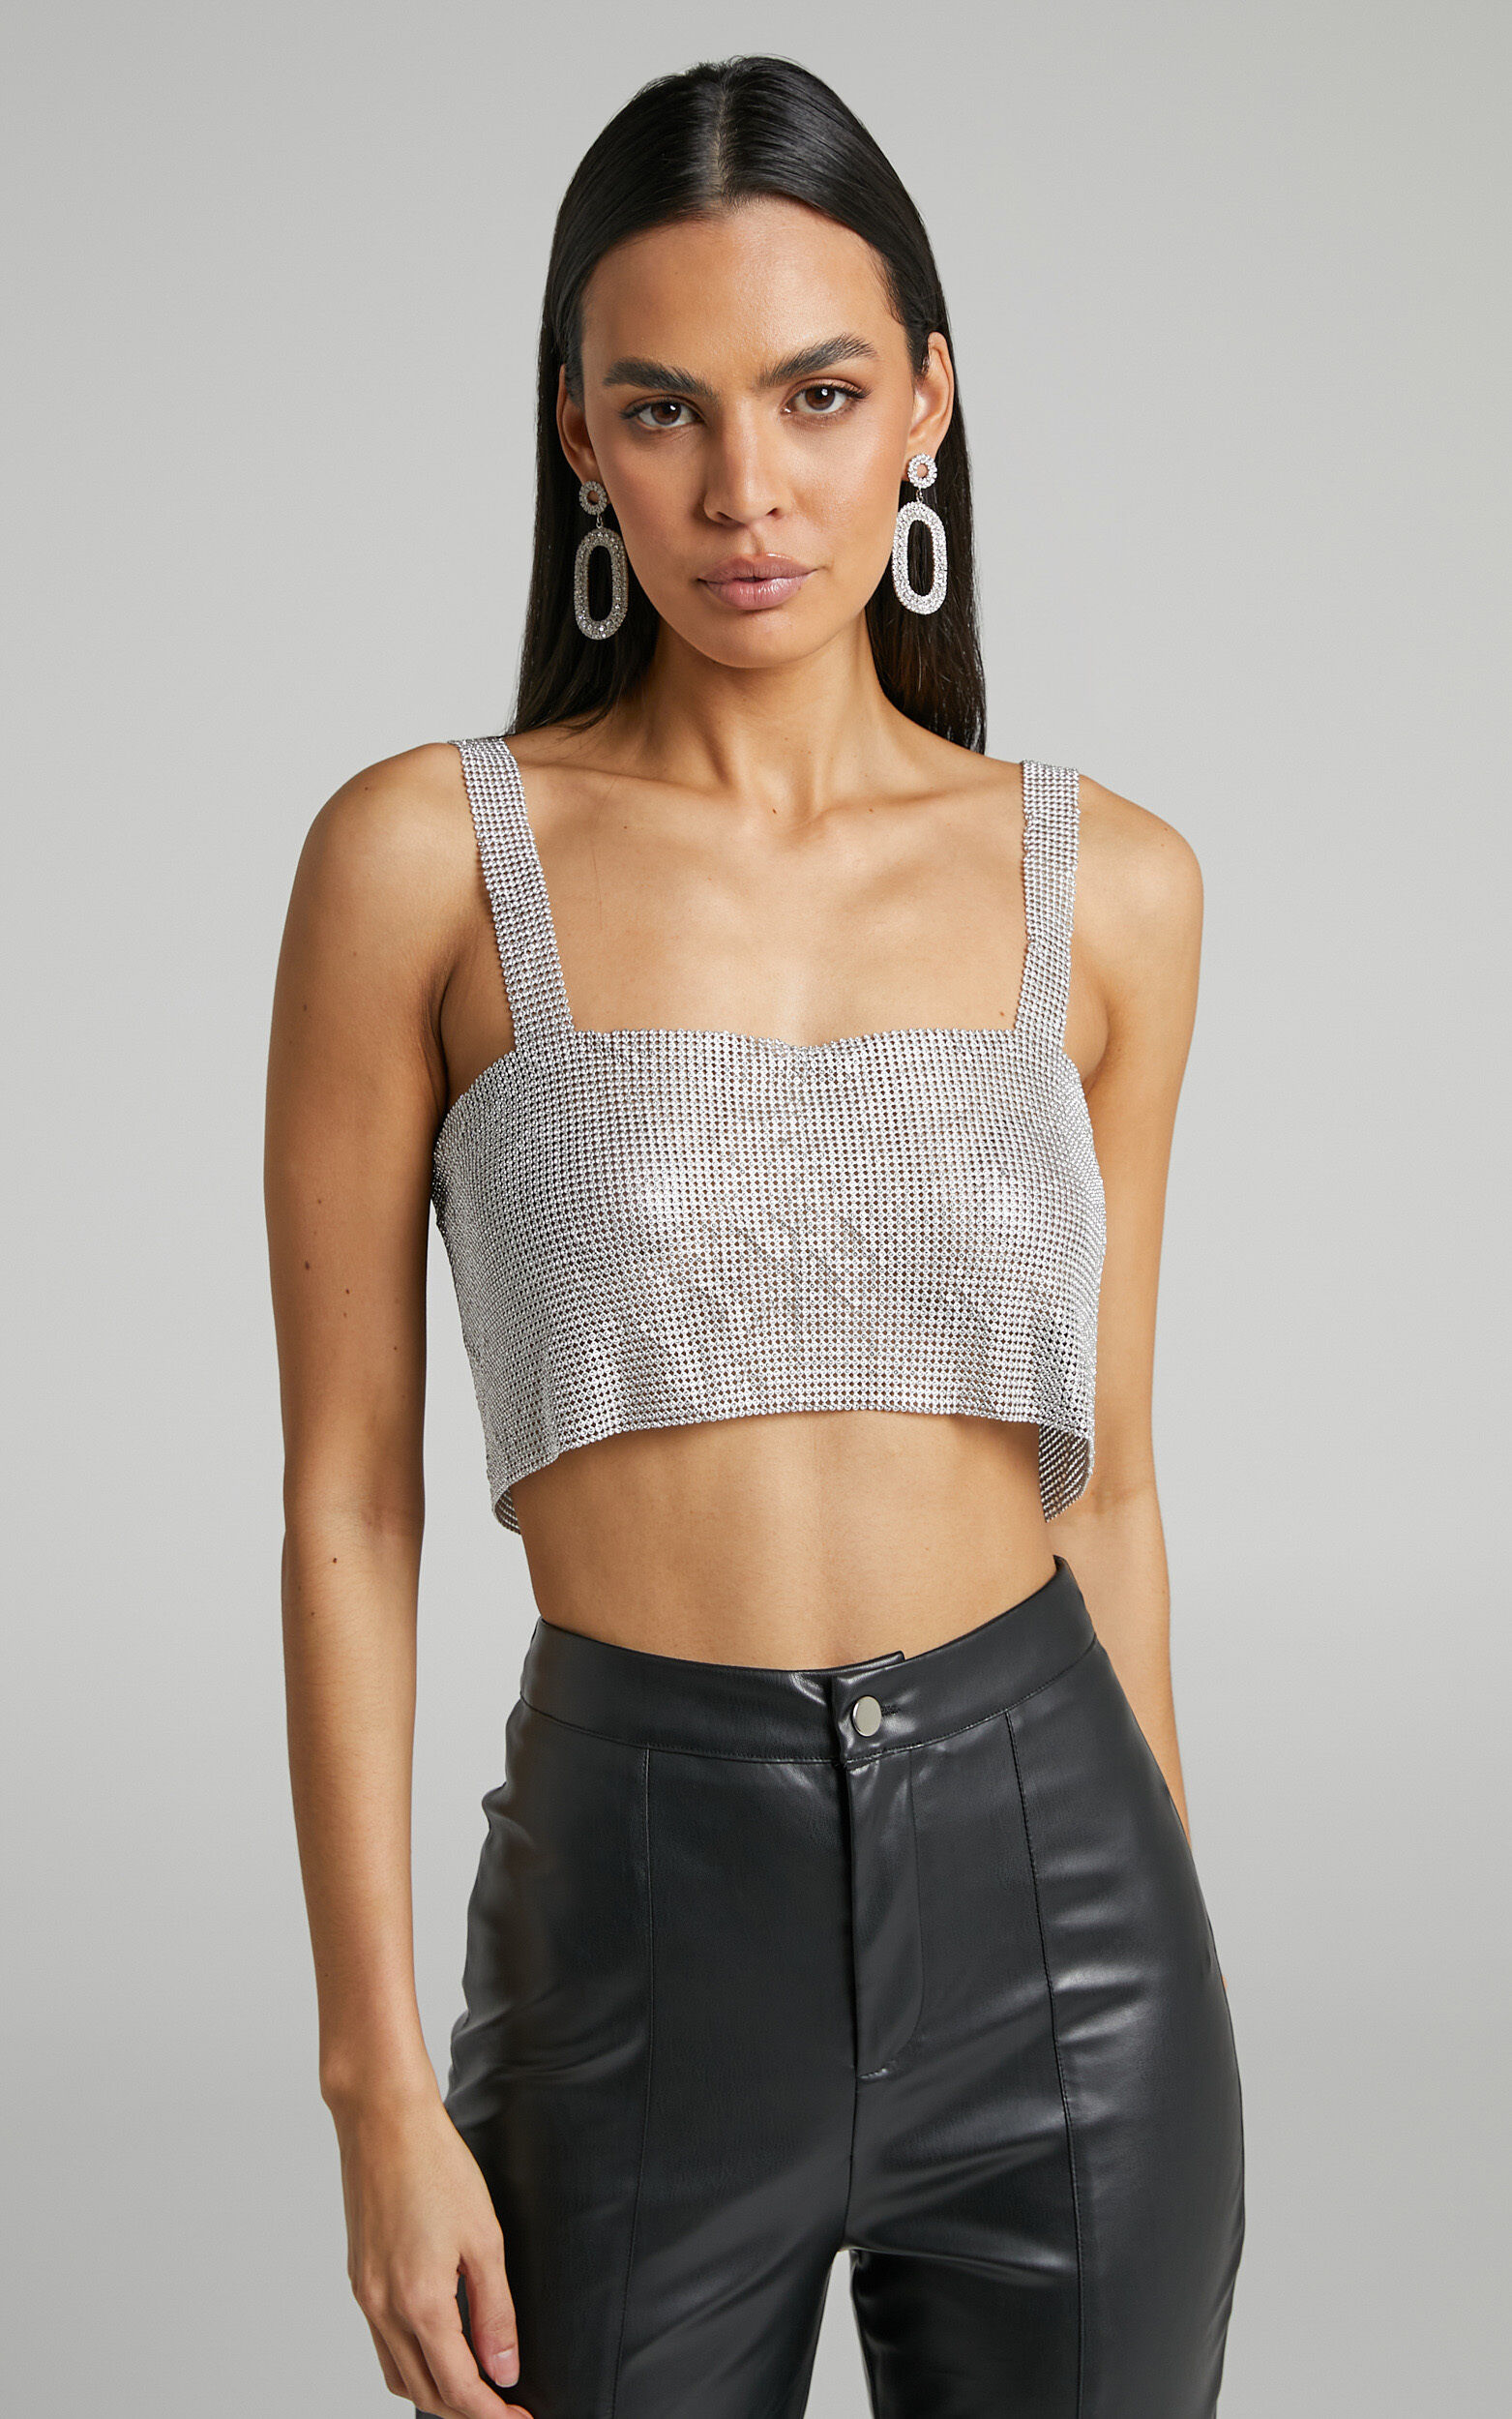 Starry Nights Mesh Cropped Top in Silver - M/L, SLV2, super-hi-res image number null